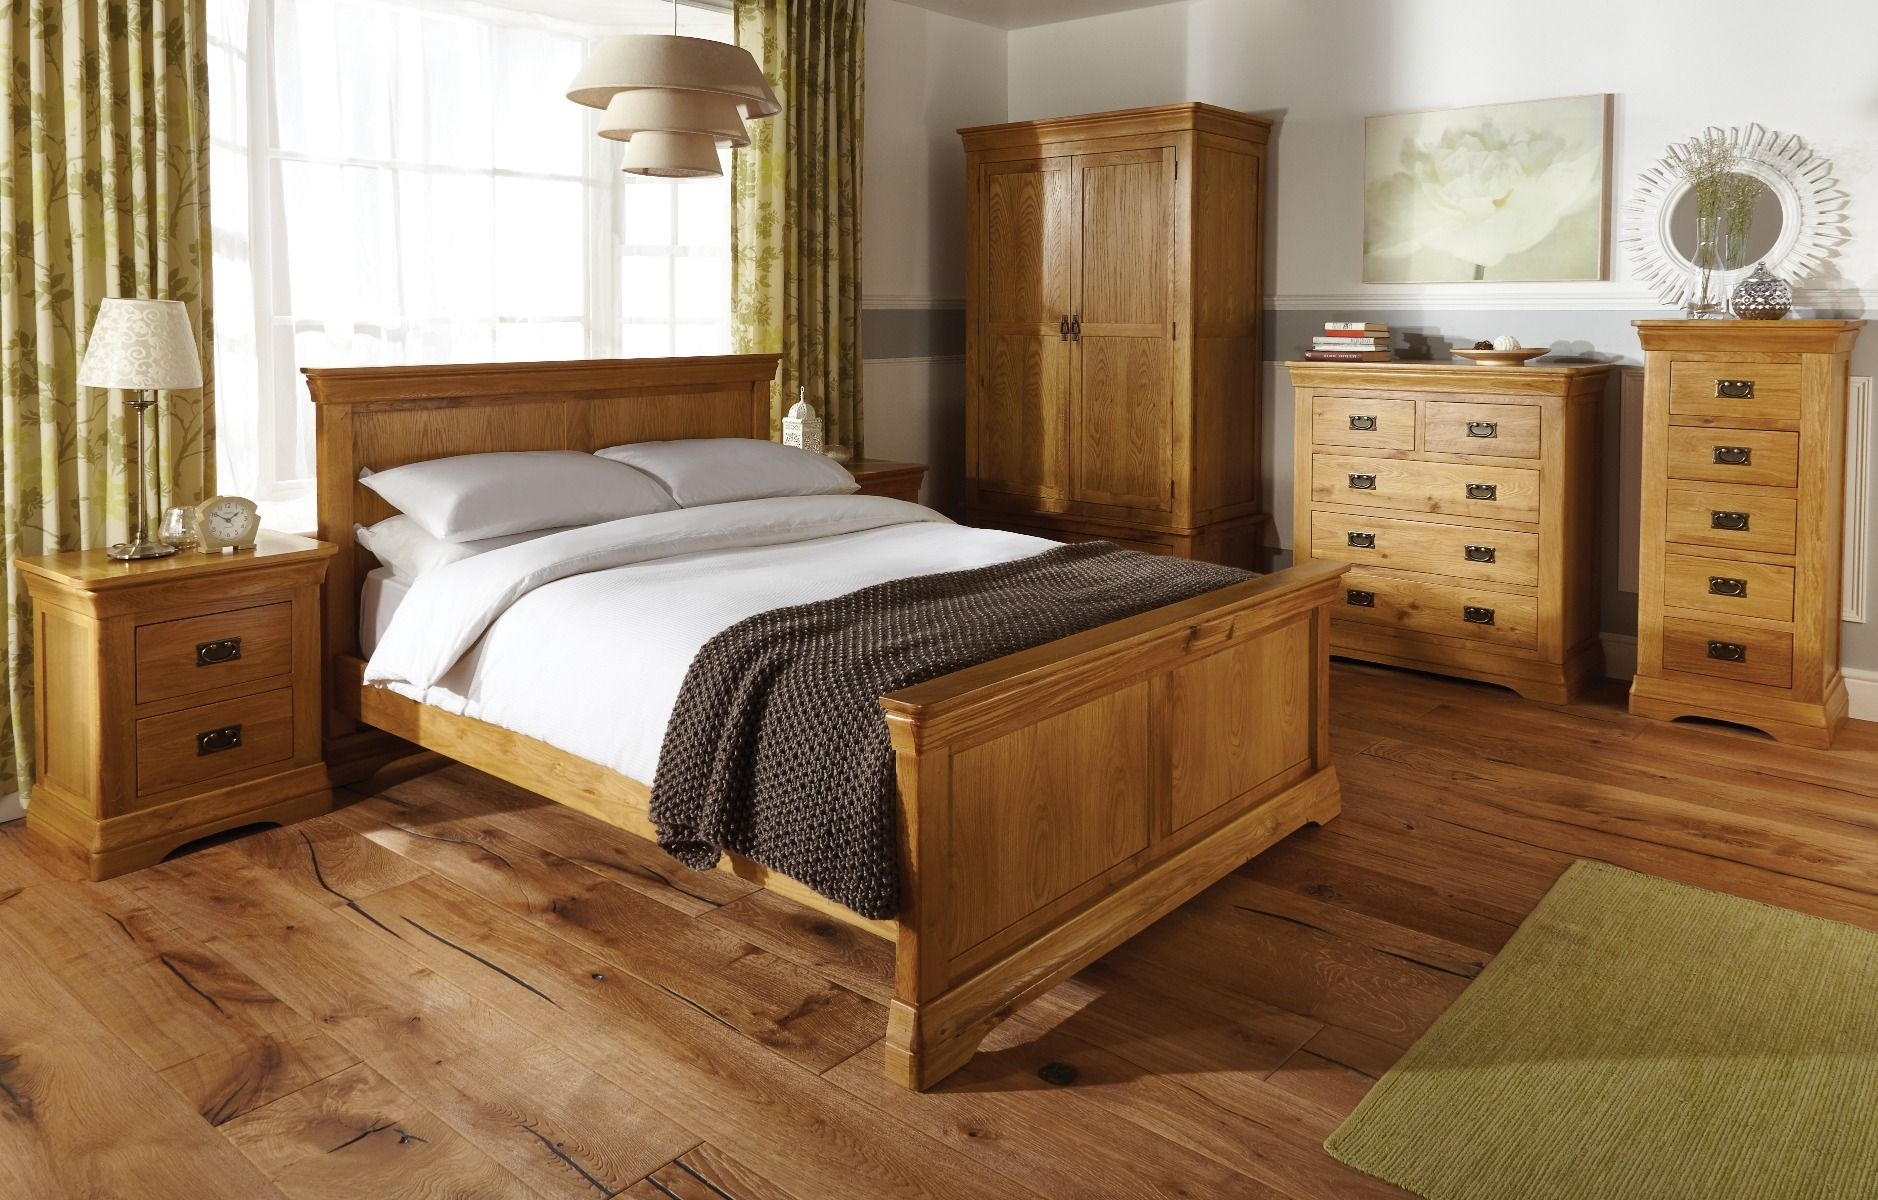 Farmhouse Country Oak Double Bed 4ft 6 Inches intended for proportions 1878 X 1200